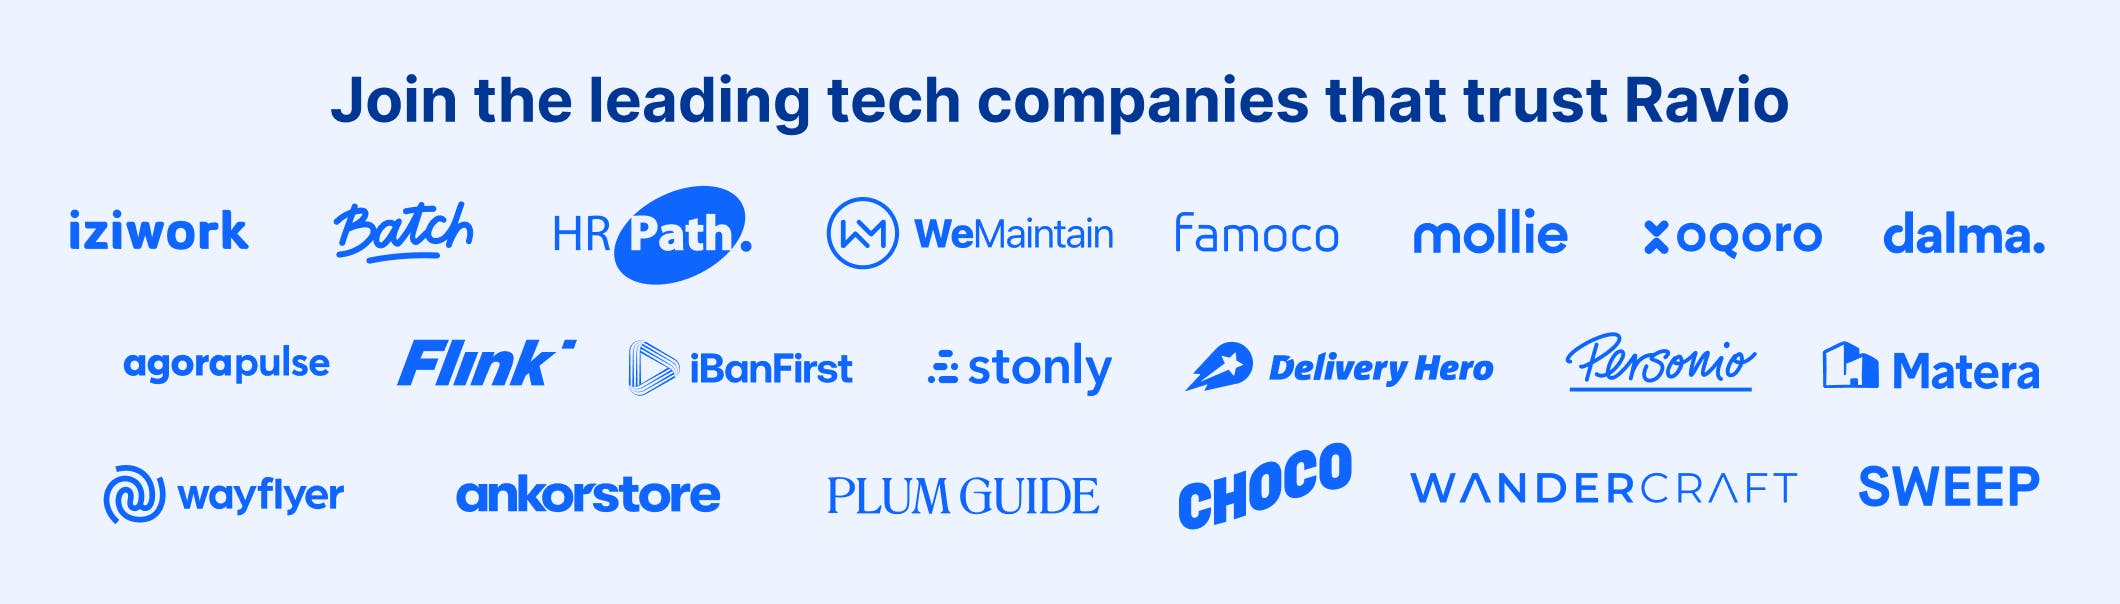 Join the leading tech companies that trust Ravio. Logos for: iziwork, batch, HR path, wemaintain, famoco, mollie, oqoro, dalma, agorapulse, flink, ibanfirst, stonly, delivery hero, personio, matera, wayflyer, ankorstore, plum guide, choco, wandercraft, sweep